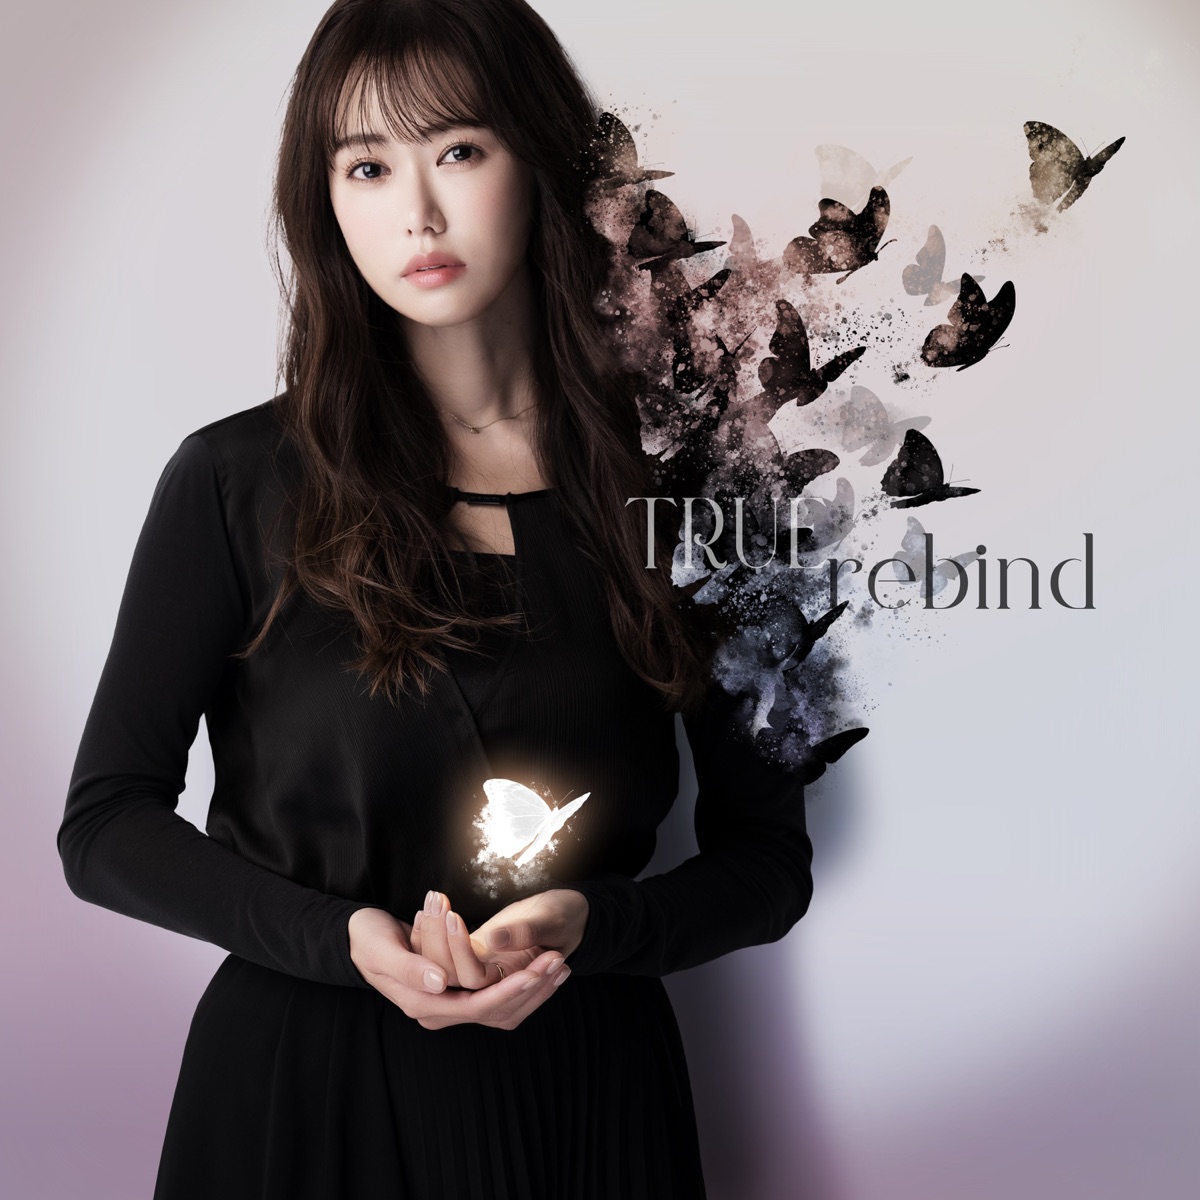 Cover art for『TRUE - DelighT』from the release『rebind